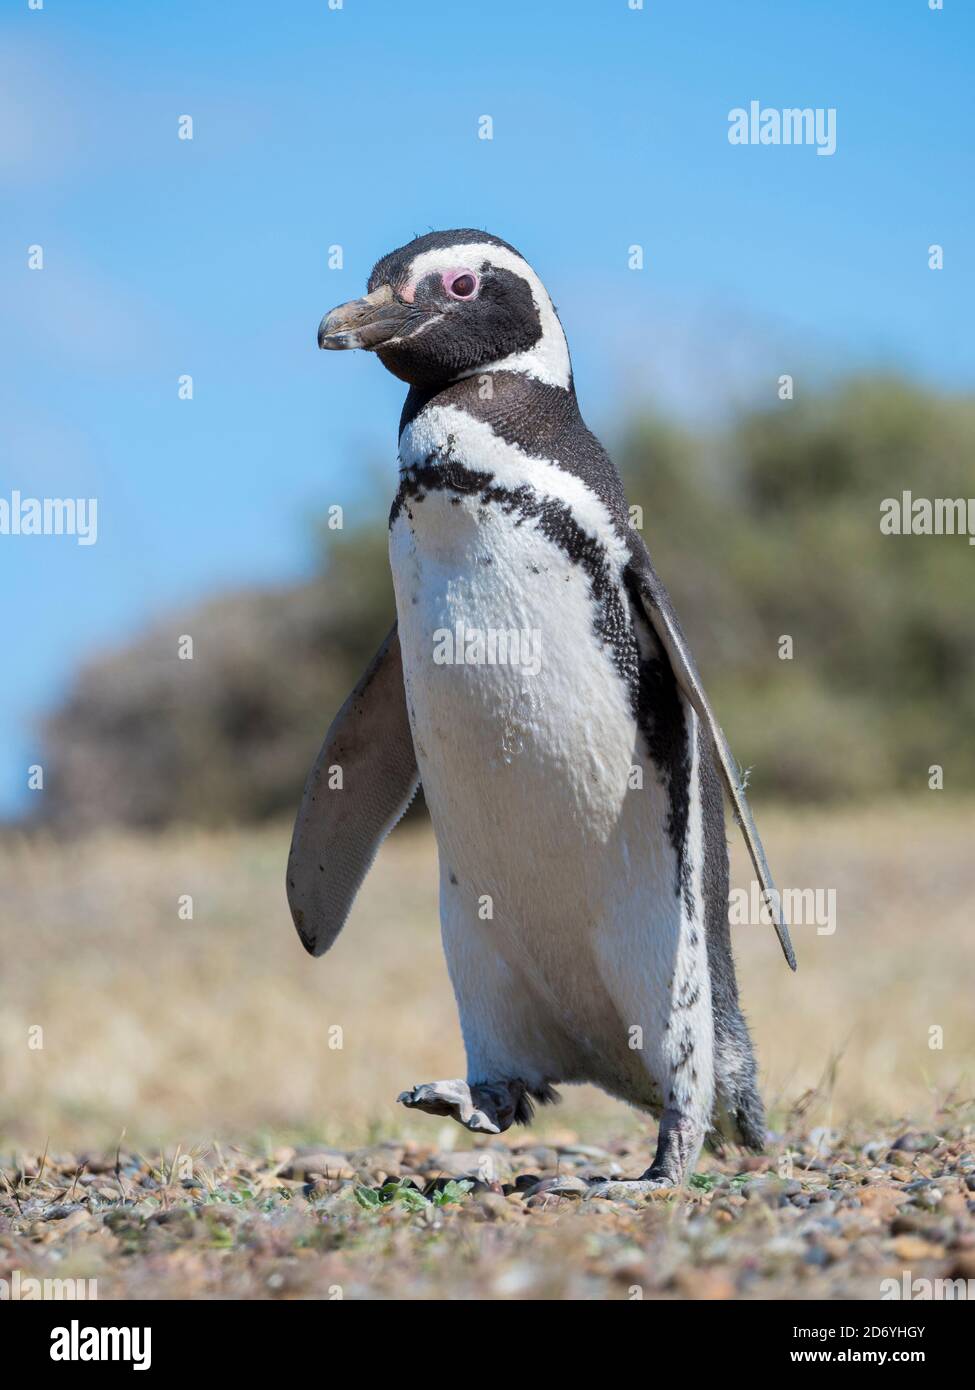 Magellanic Penguin  (Spheniscus magellanicus) in colony in Valdes. The peninsula Valdes is nature reserve and listed as UNESCO world heritage. South A Stock Photo